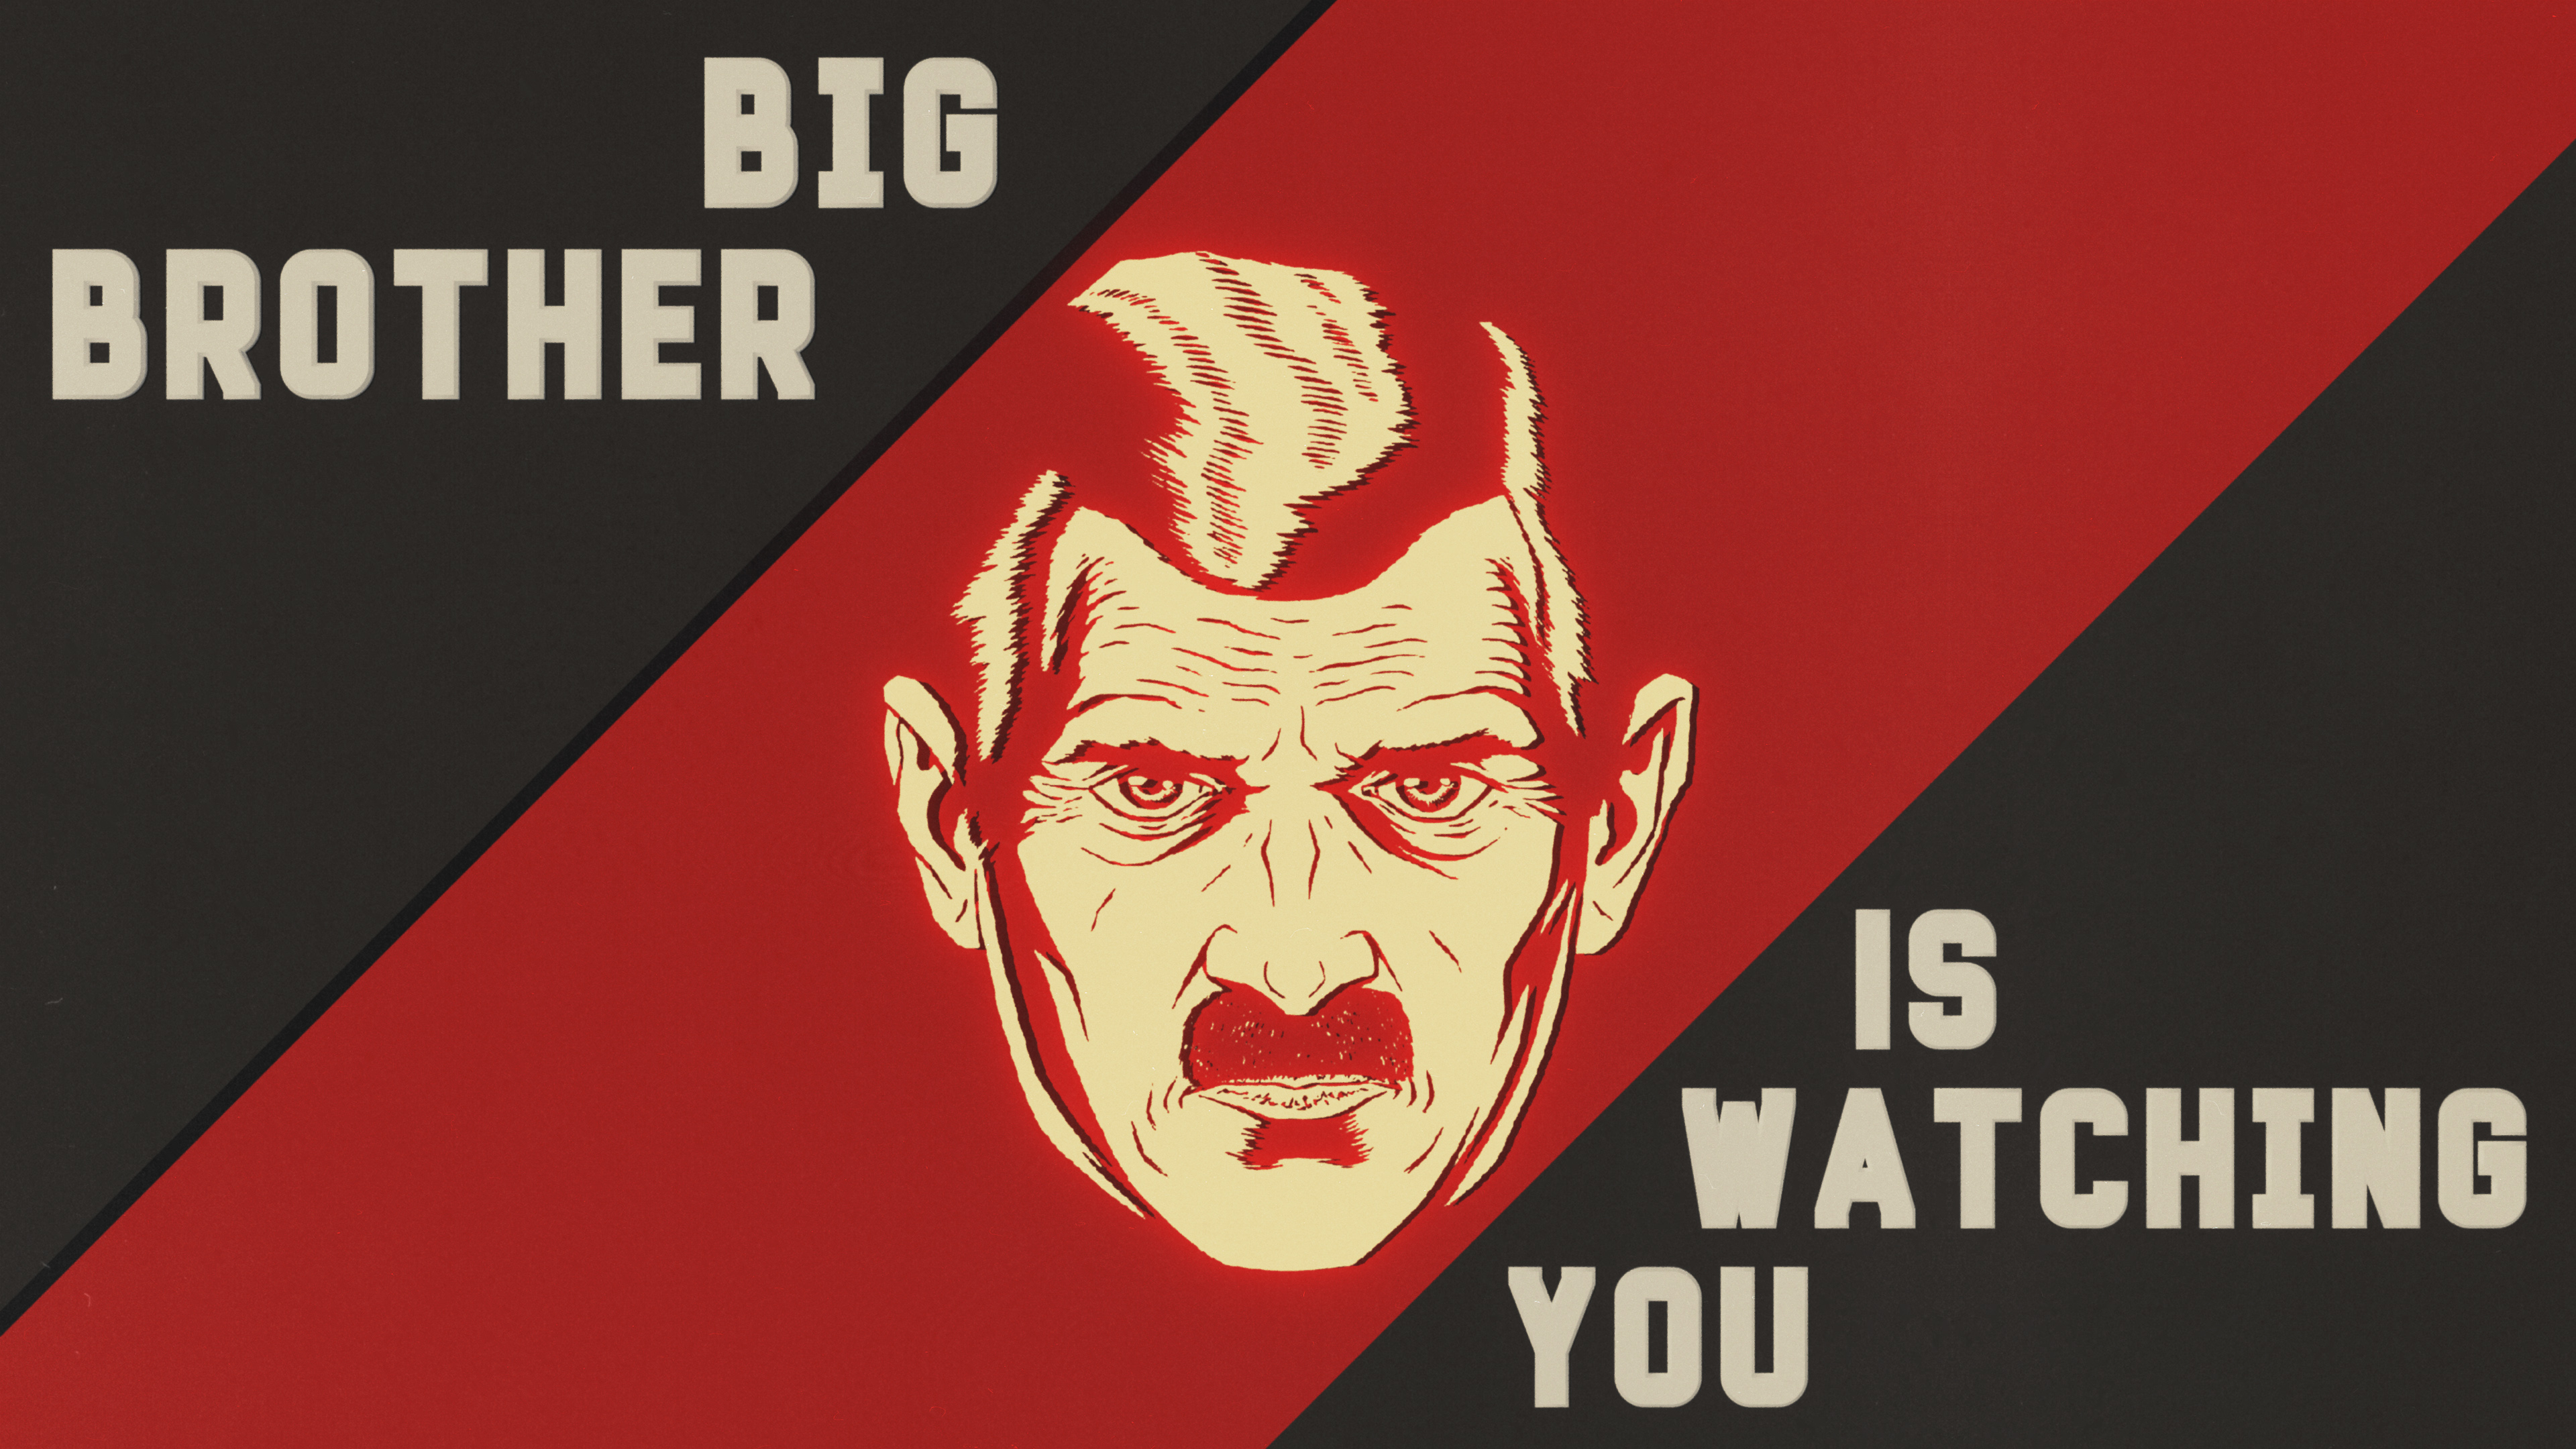 George Orwell Totalitarianism Big Brother Red Text Face Retro Style Blender CGi 1984 Men Mustache 3840x2160